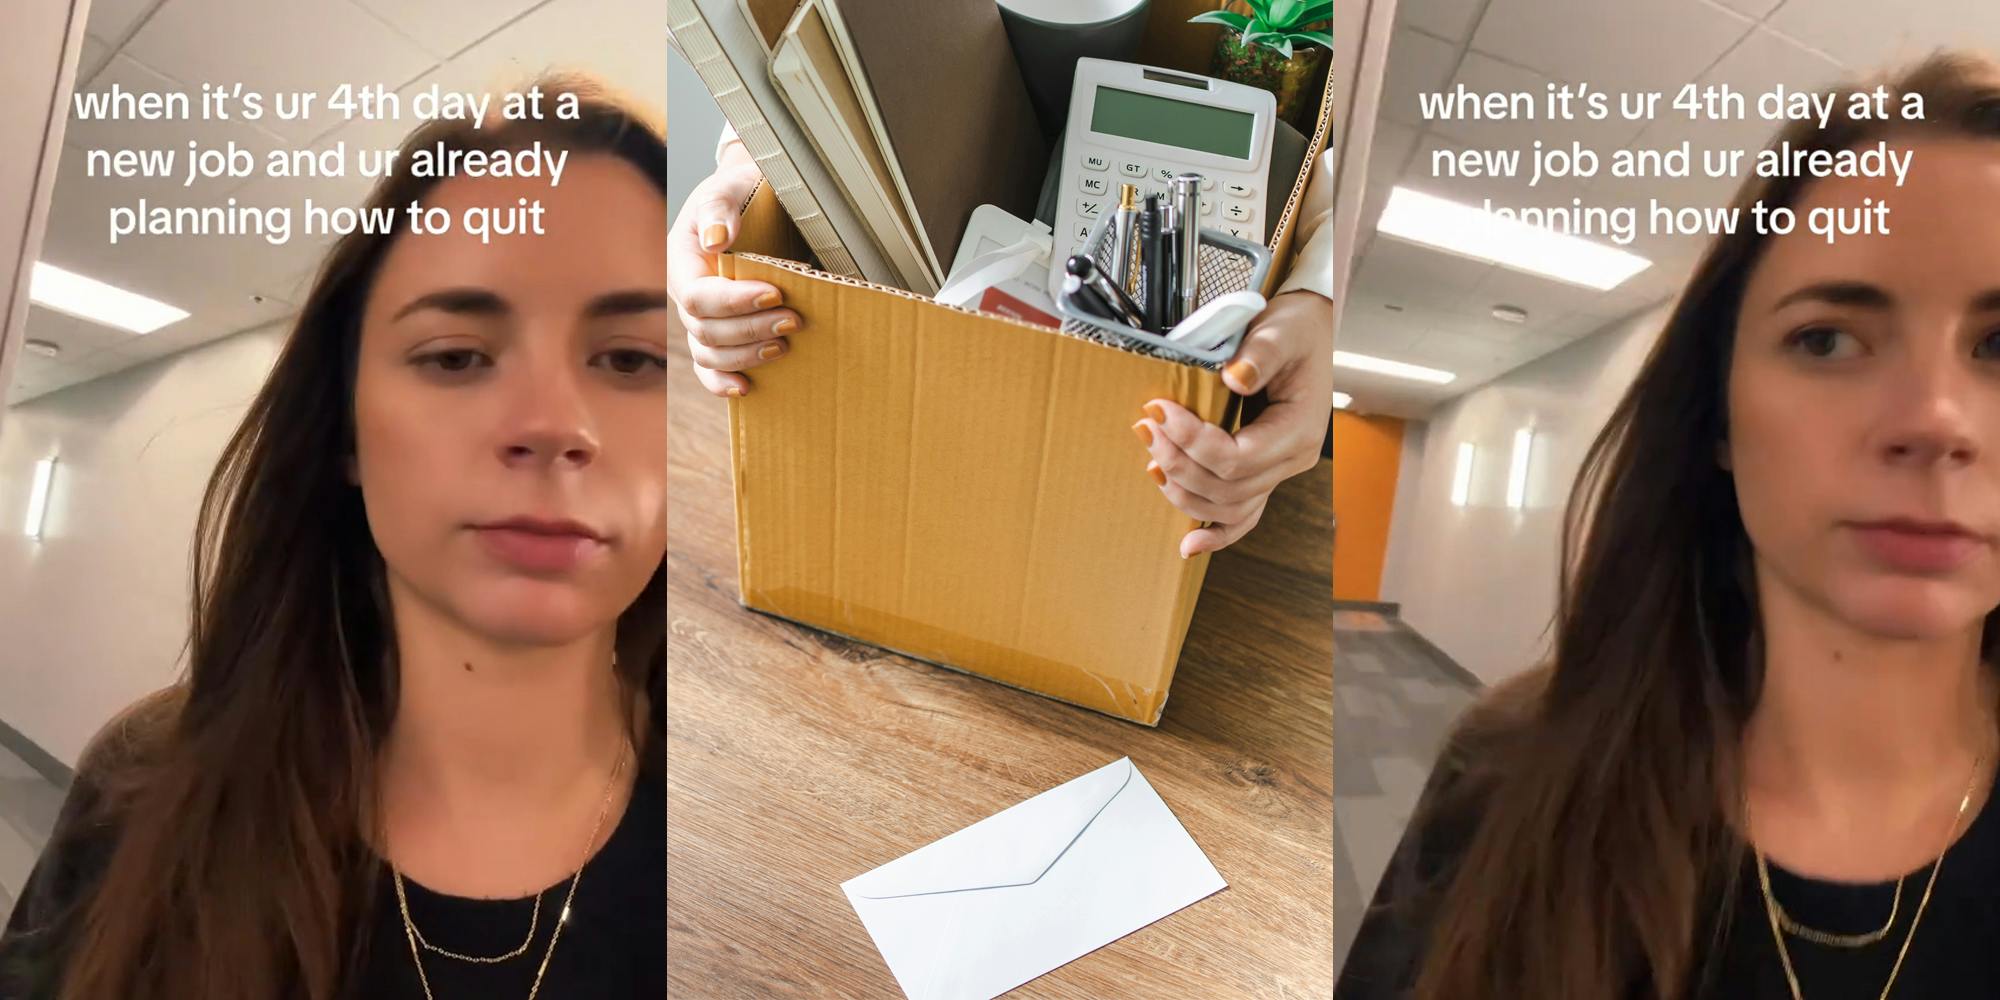 worker walking in hallway with caption "when it's ur 4th day at a new job and ur already planning how to quit" (l) worker with items in cardboard box with resignation letter in envelope on table (c) worker walking in hallway with caption "when it's ur 4th day at a new job and ur already planning how to quit" (r)